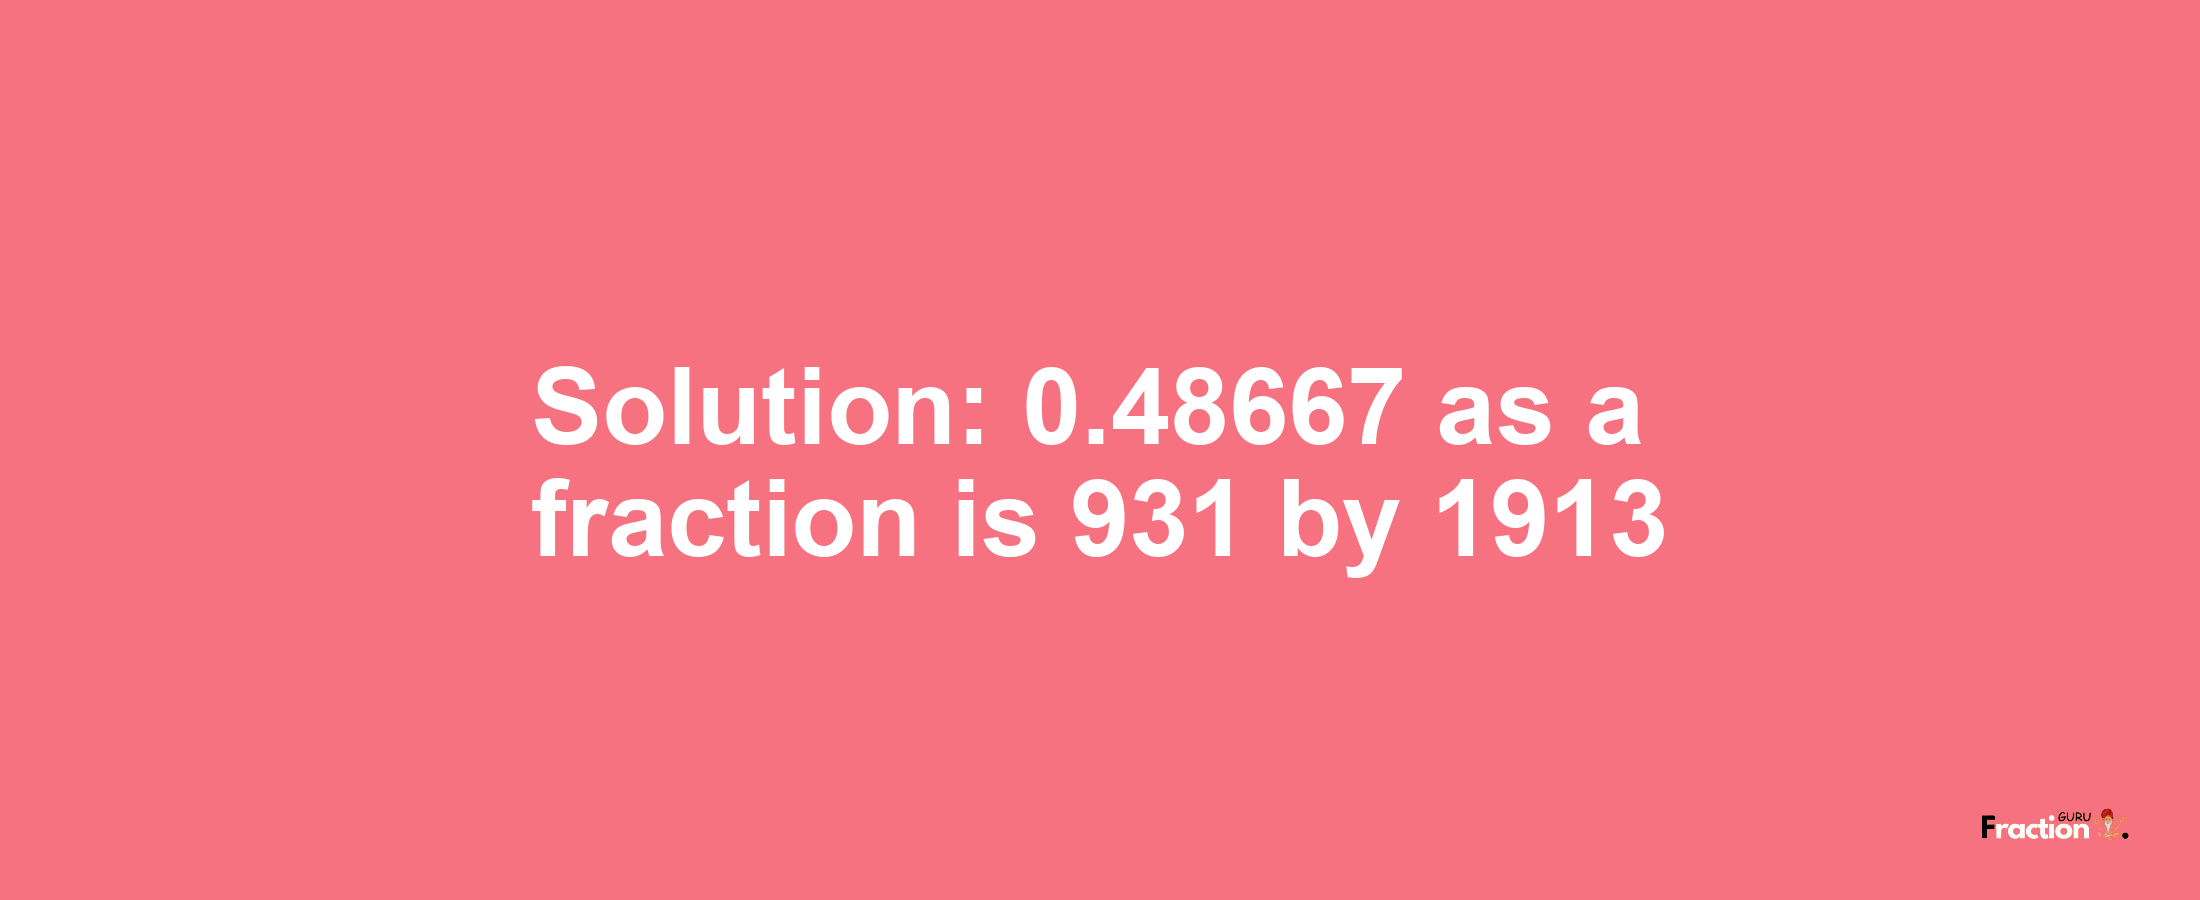 Solution:0.48667 as a fraction is 931/1913